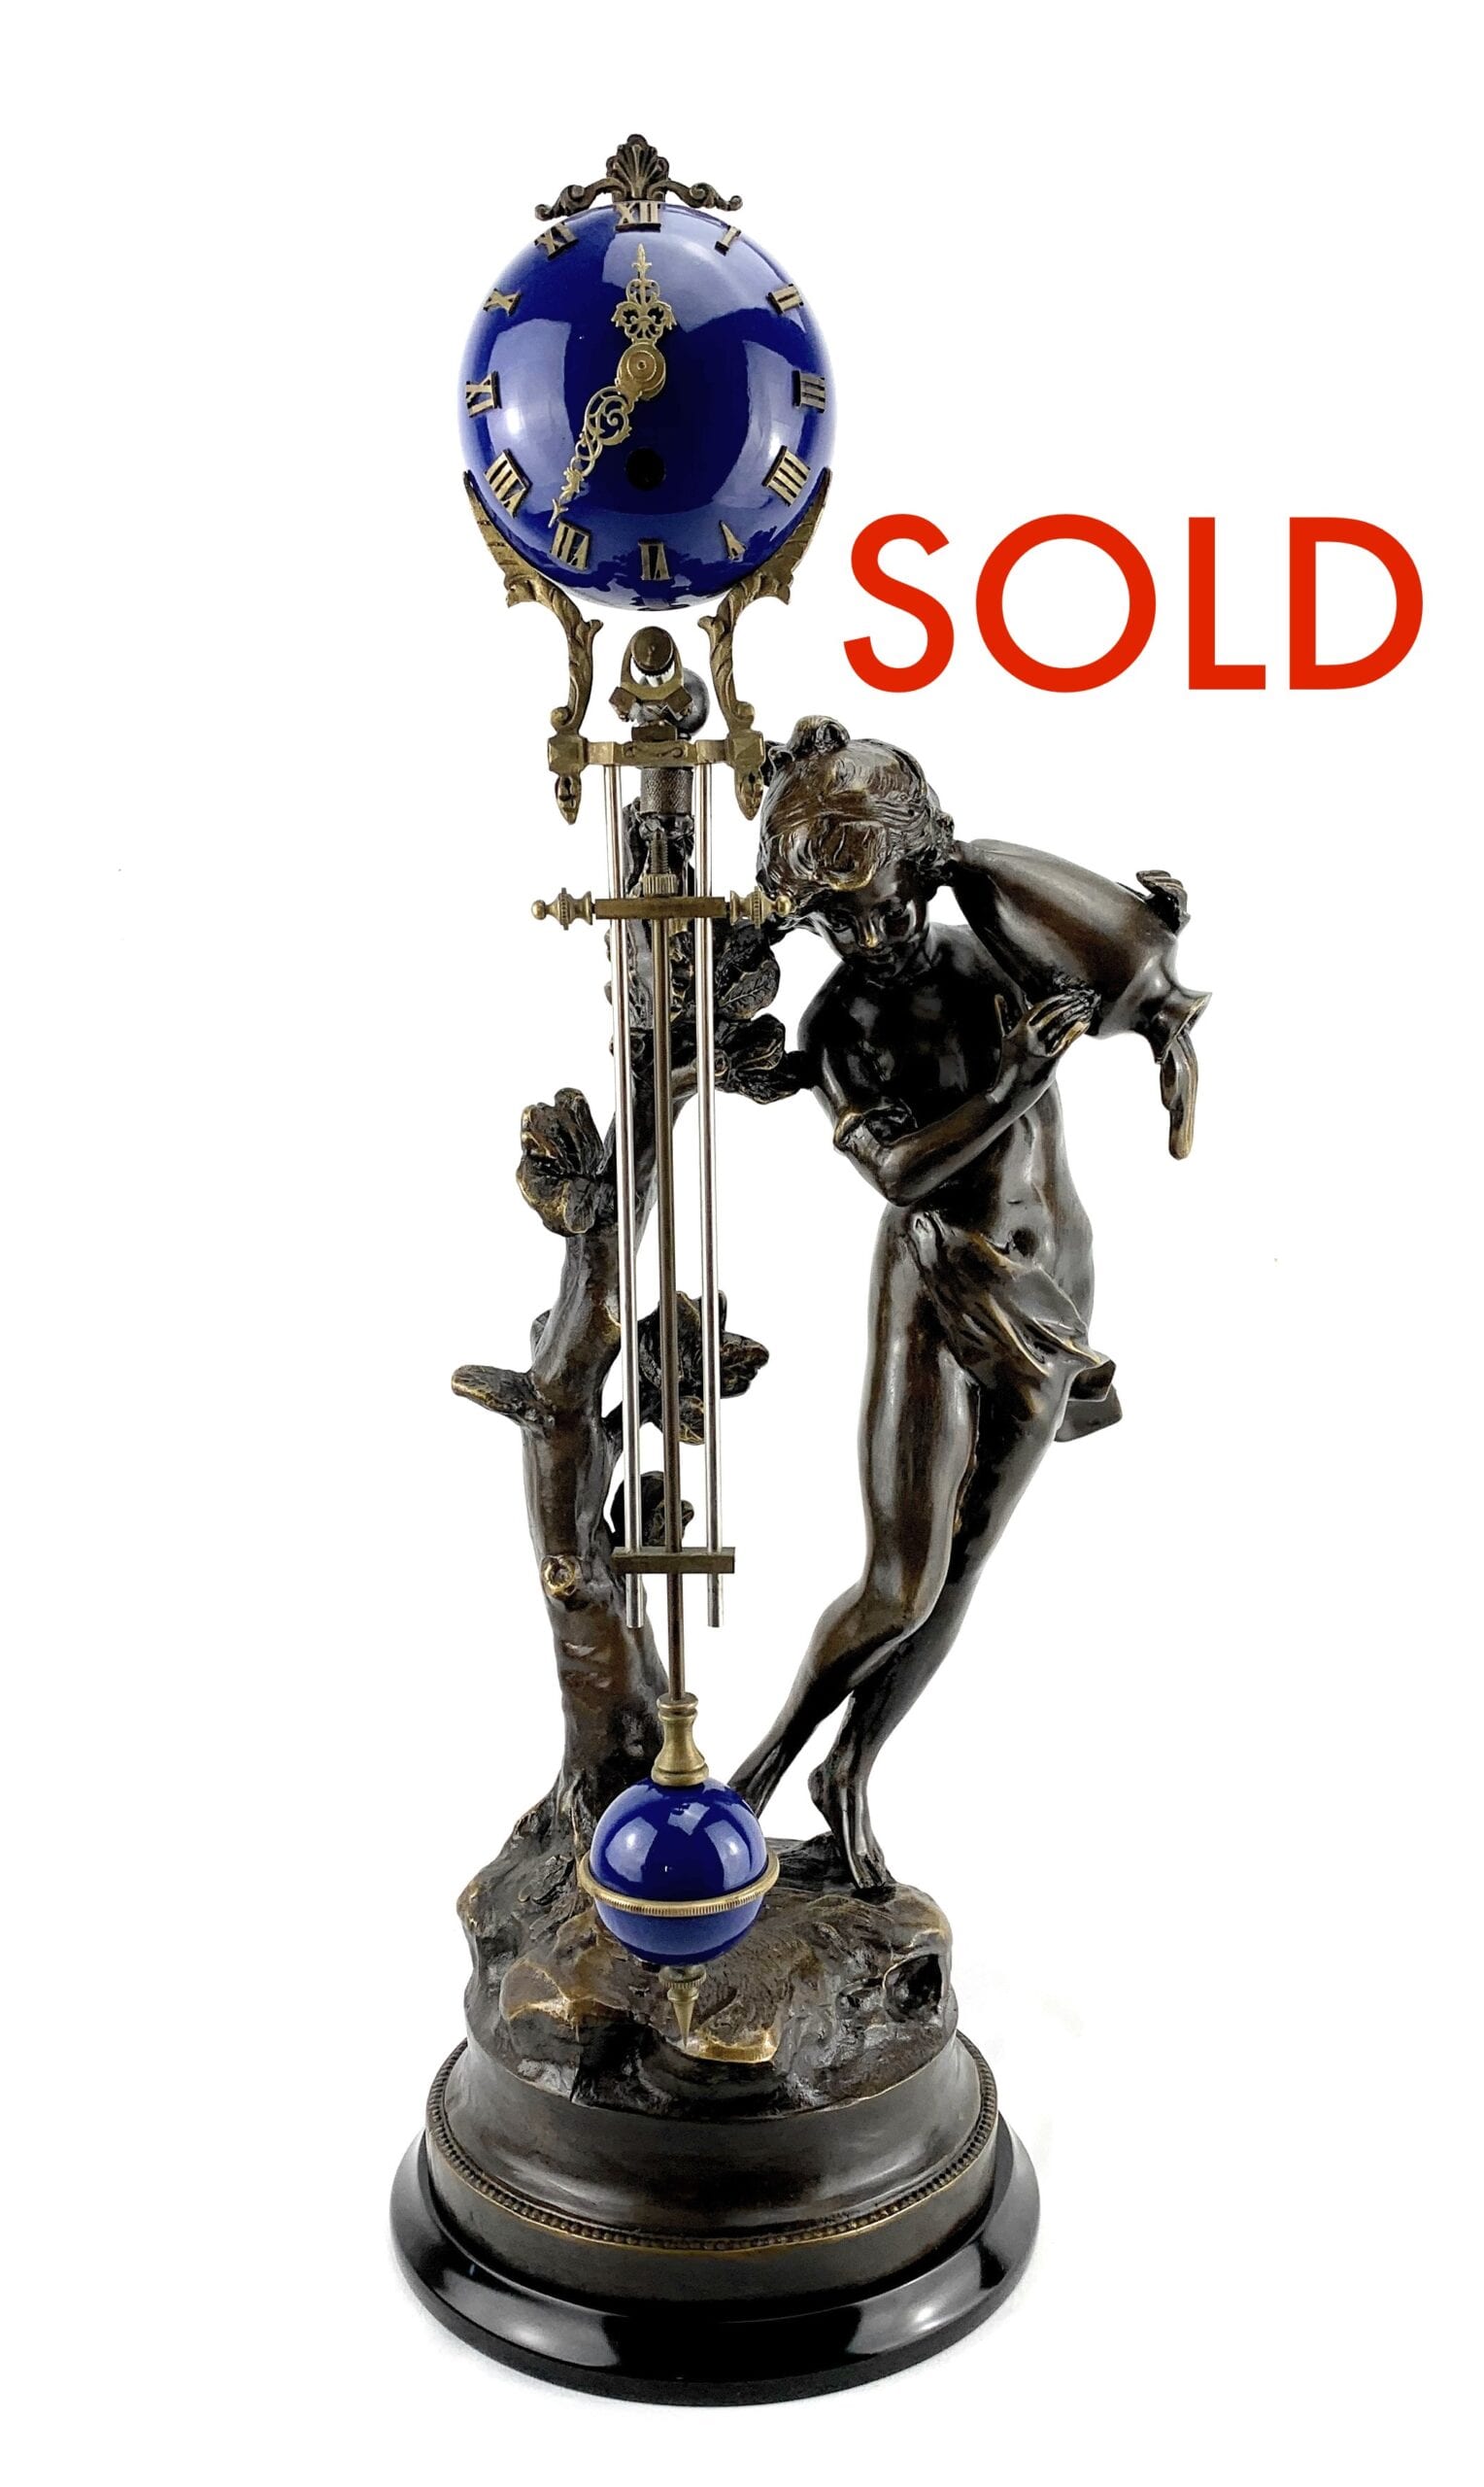 SOLD image